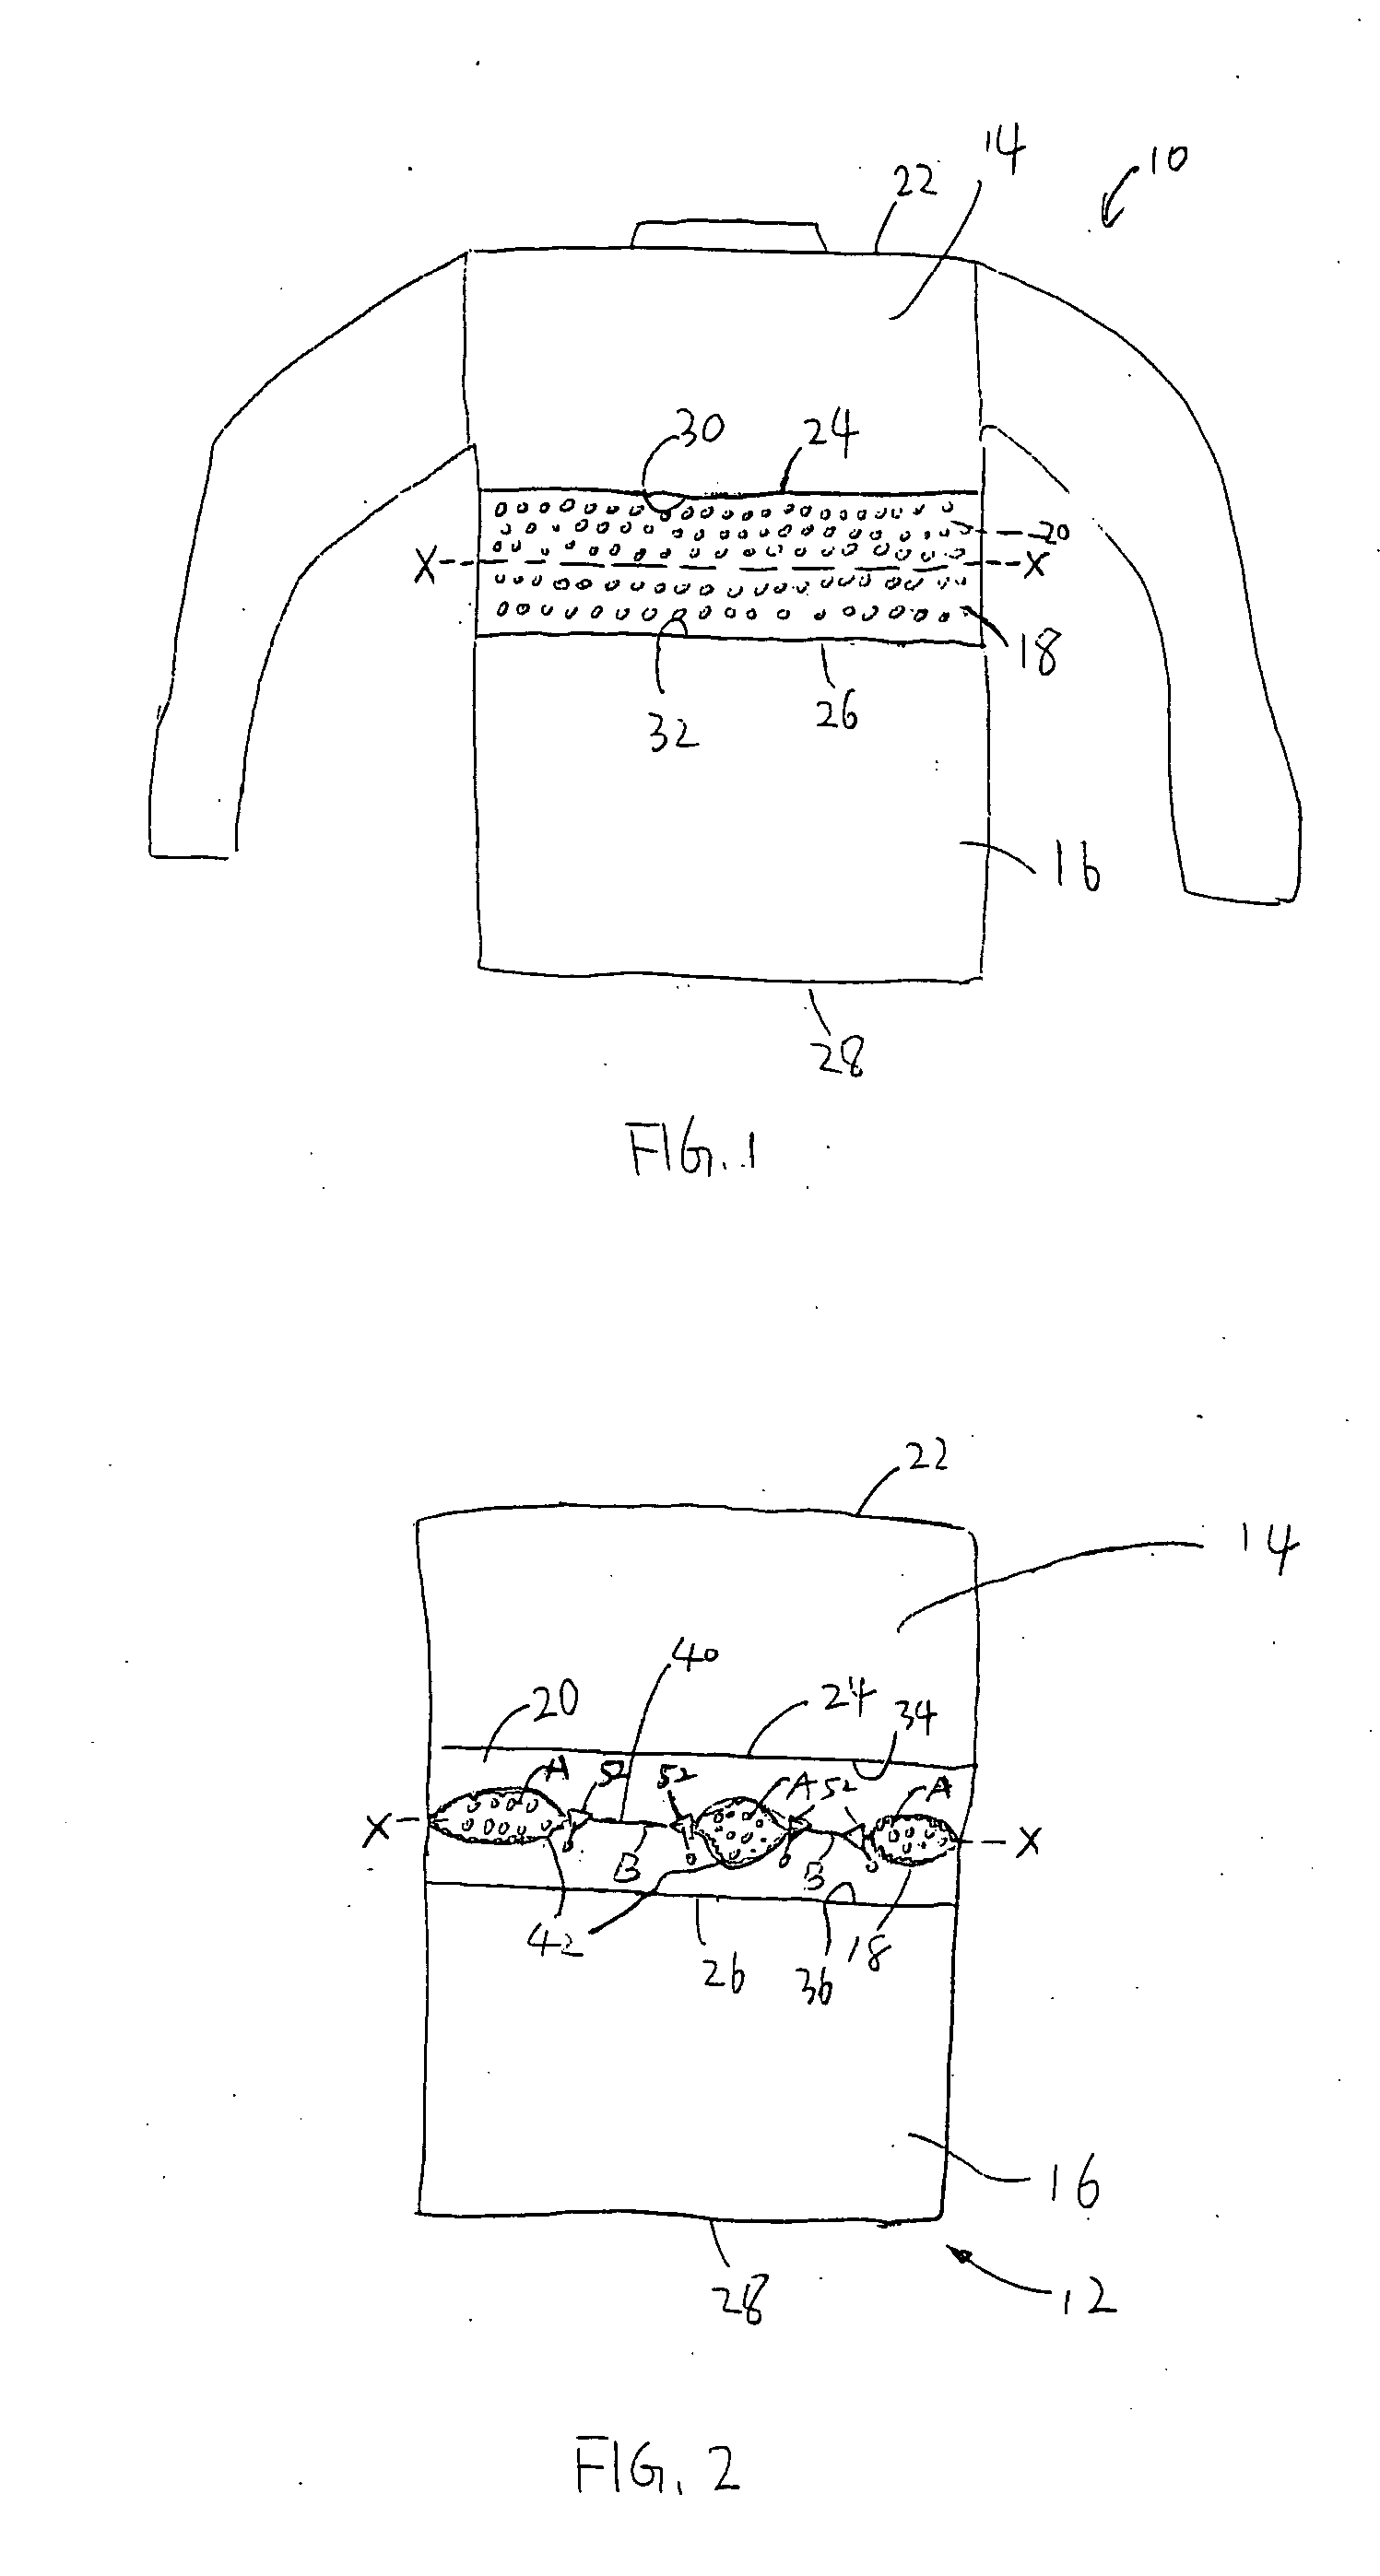 Garment with subpanel ventilation assembly